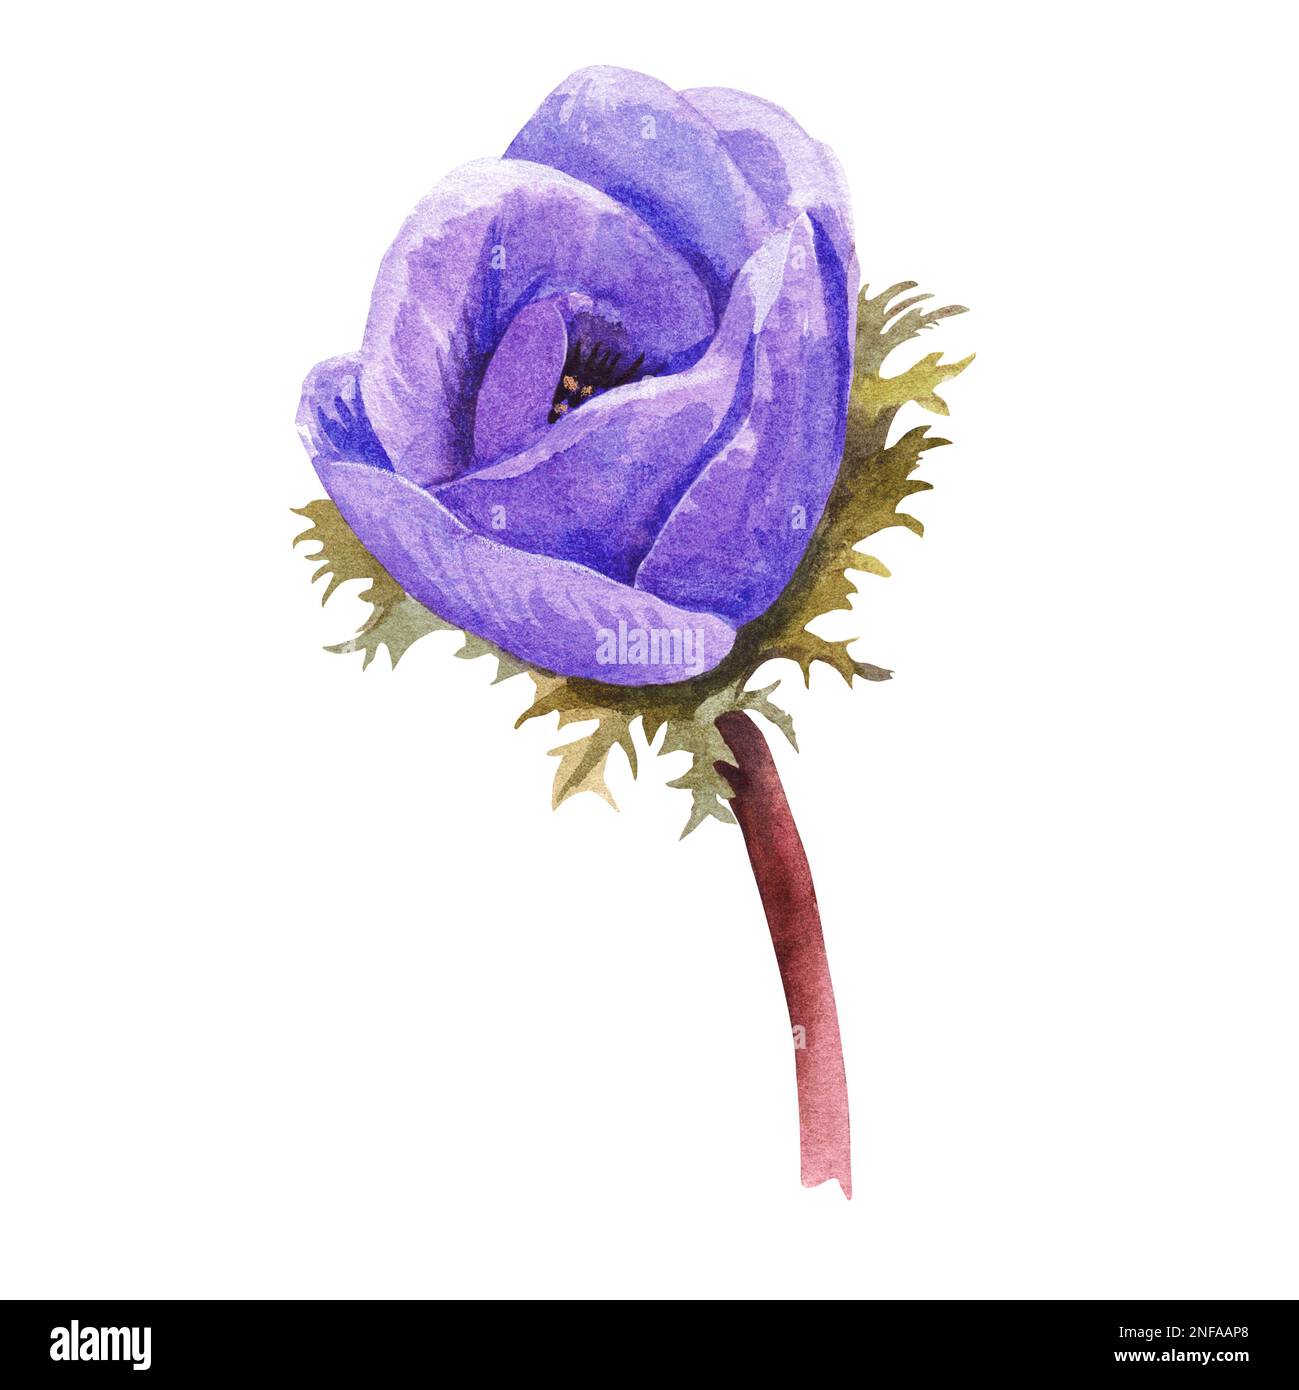 Purple anemone bud on a white background. Blooms watercolor illustration. Stock Photo